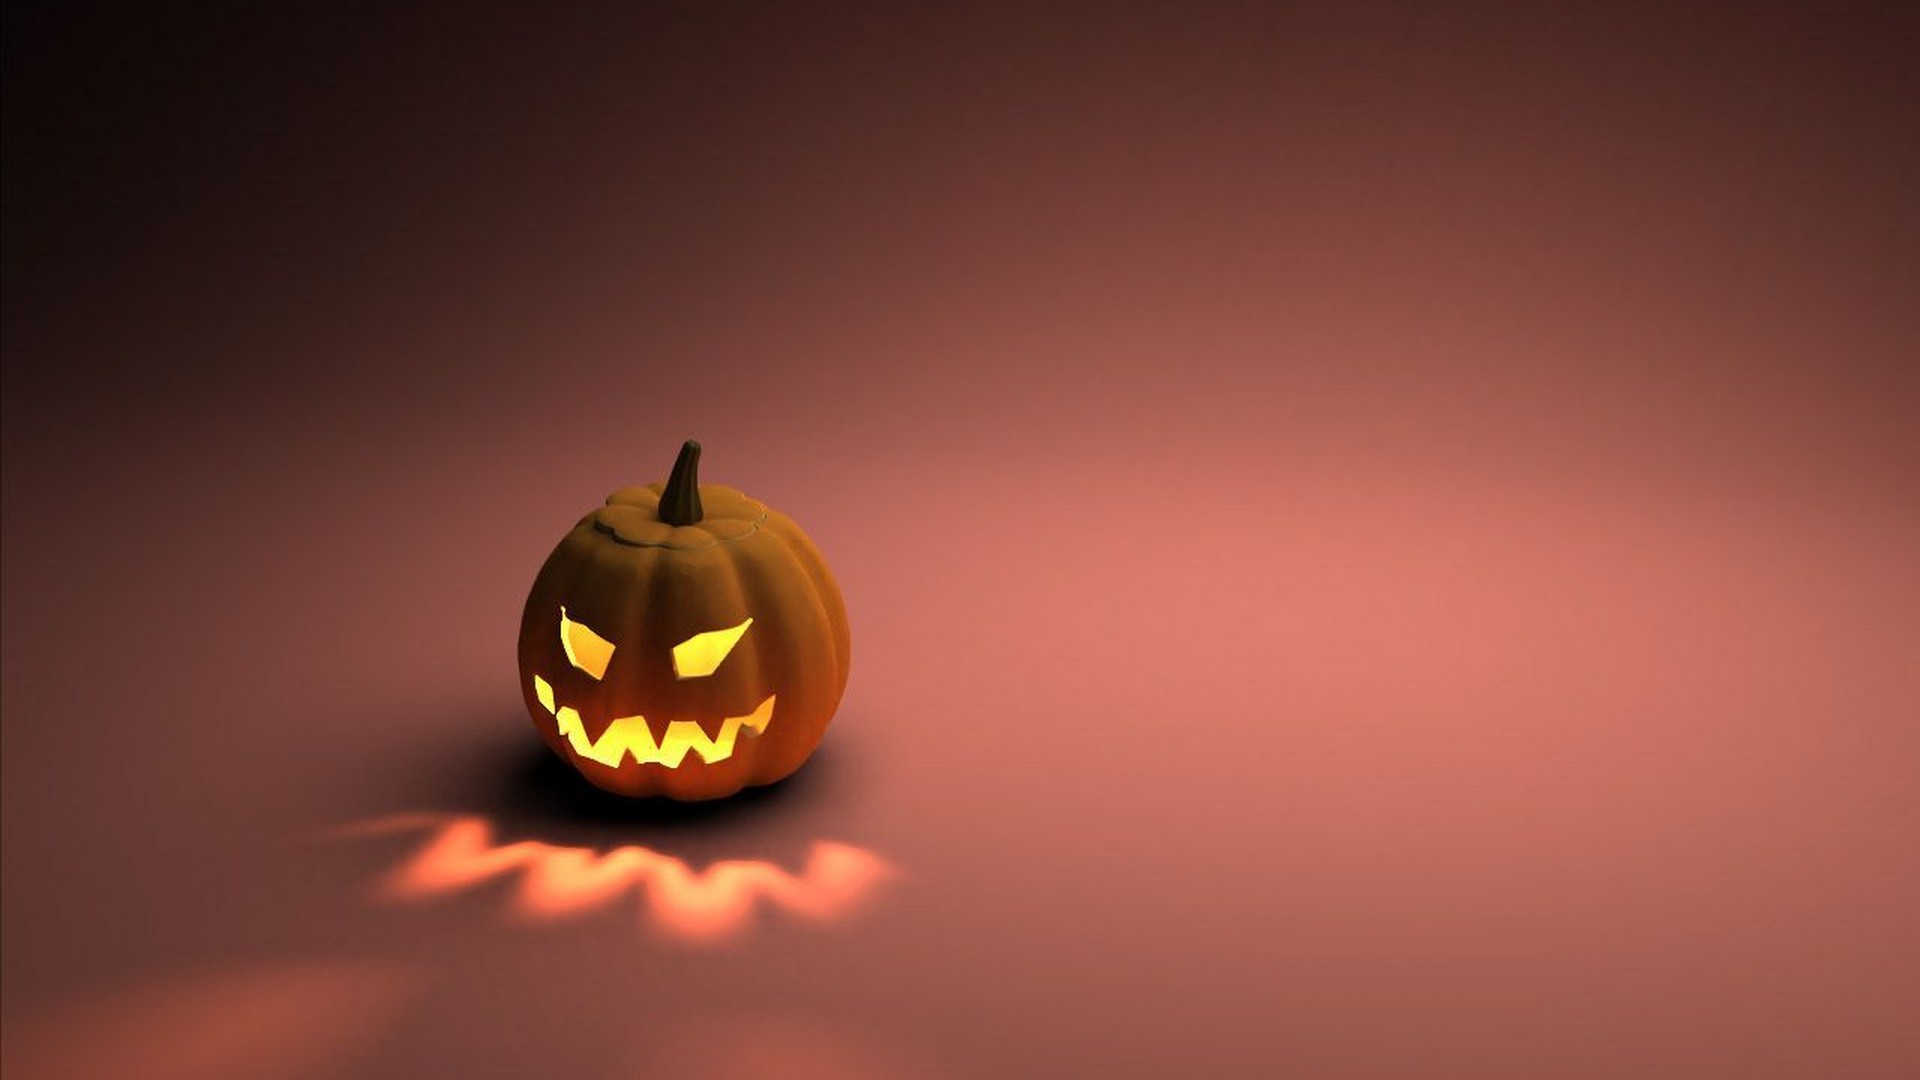 Wallpaper Halloween HD With high-resolution 1920X1080 pixel. You can use this wallpaper for your Desktop Computer Backgrounds, Mac Wallpapers, Android Lock screen or iPhone Screensavers and another smartphone device